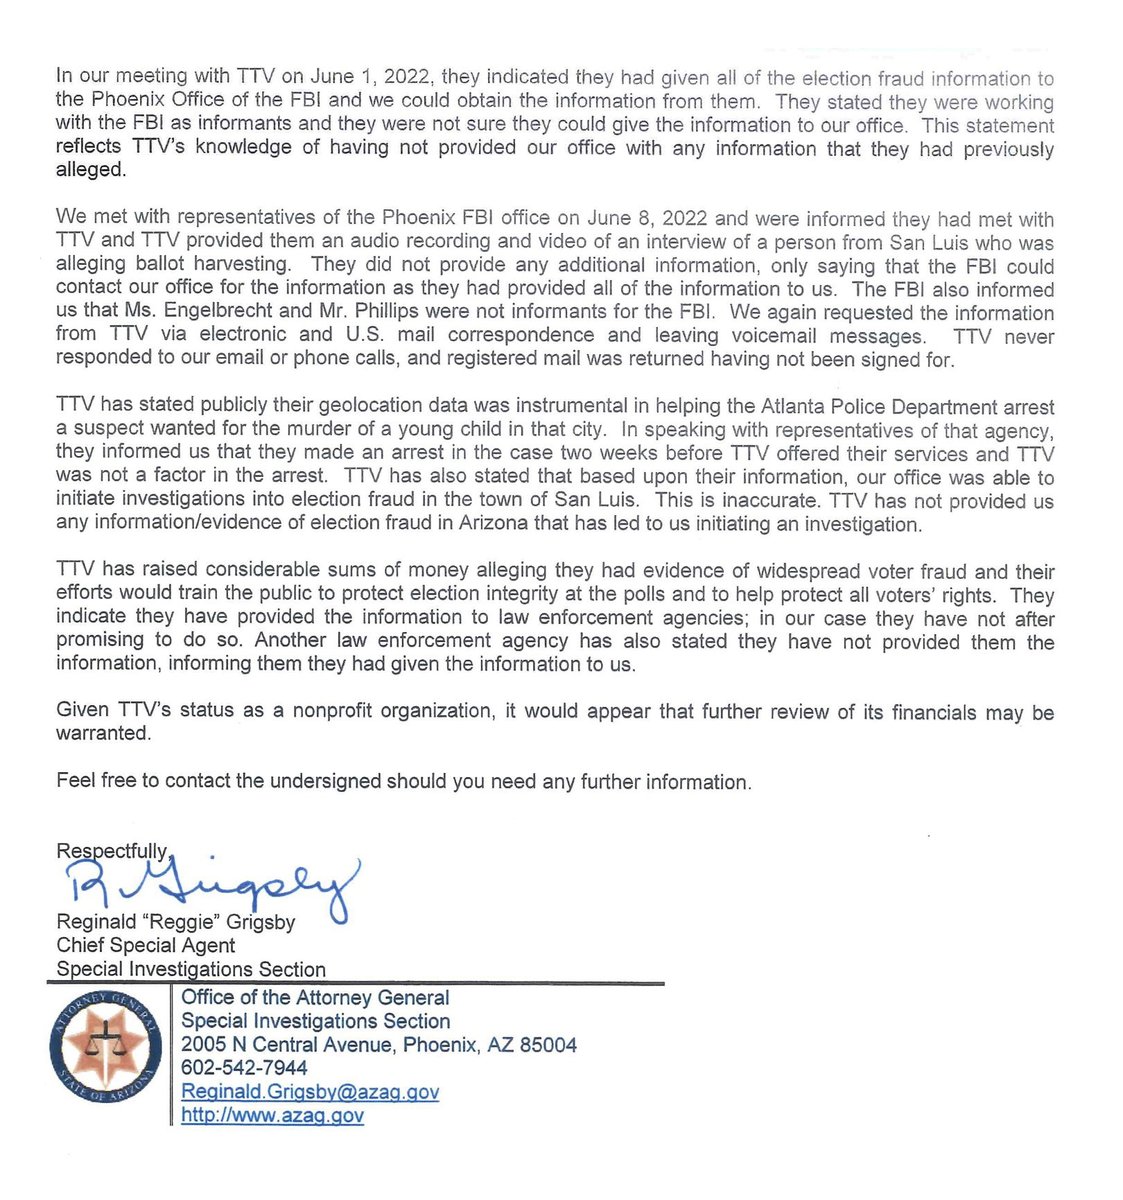 🔍 Despite repeated requests from Arizona's Attorney General Criminal Division, @TrueTheVote failed to provide any evidence backing their 'ballot stuffing' allegations. In Oct 2020, this lack of proof raised serious doubts about True The Vote's lack credibility.